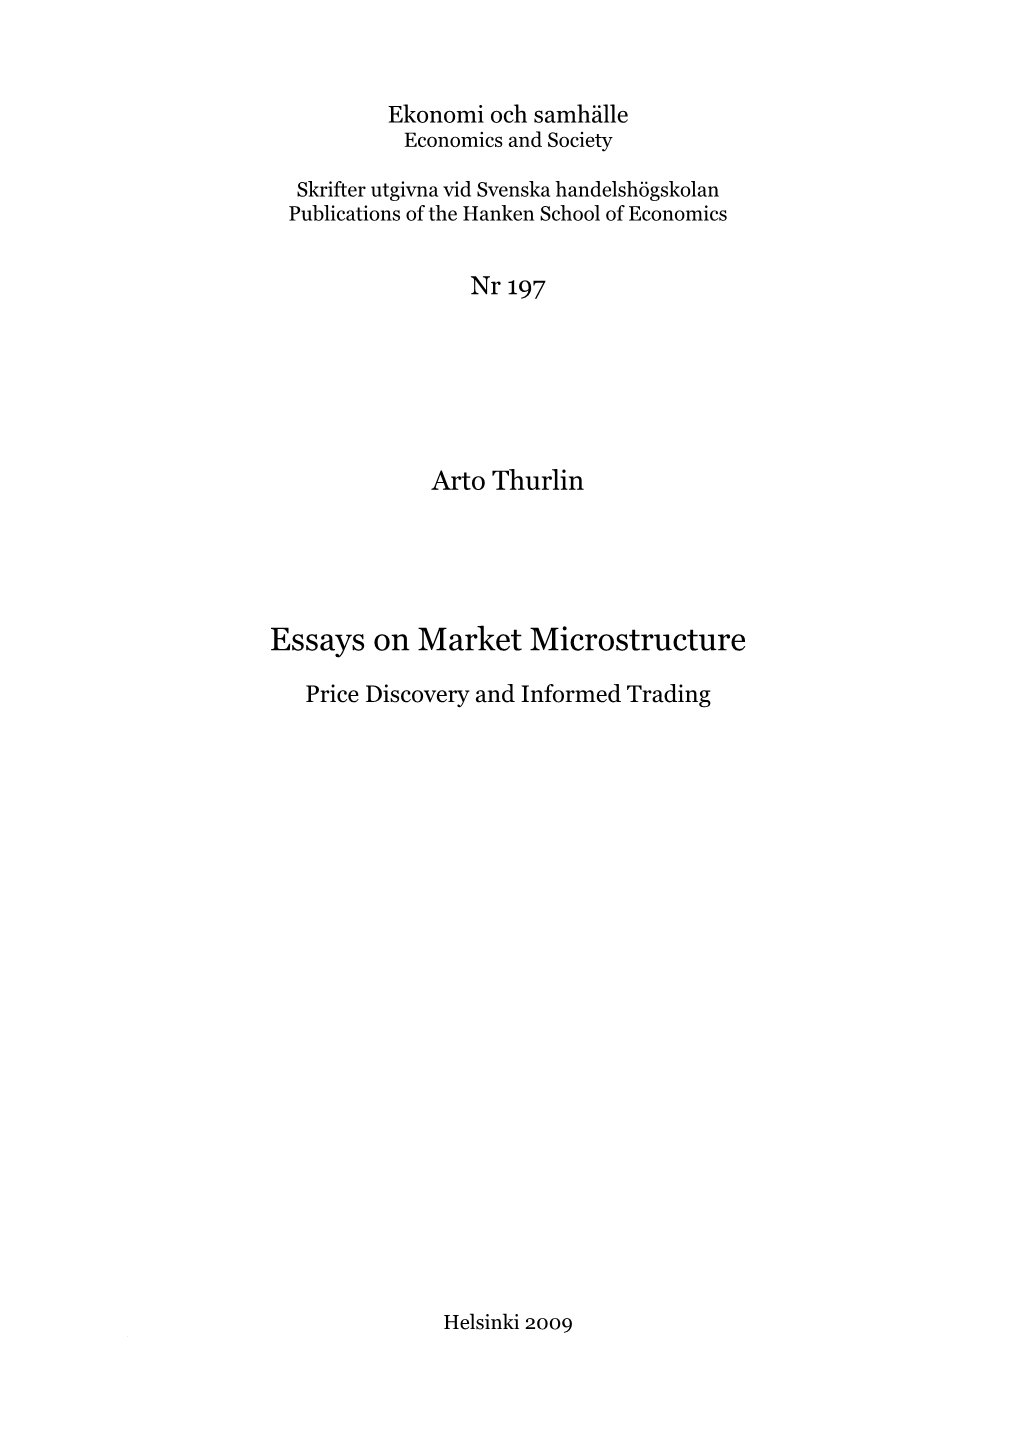 Essays on Market Microstructure